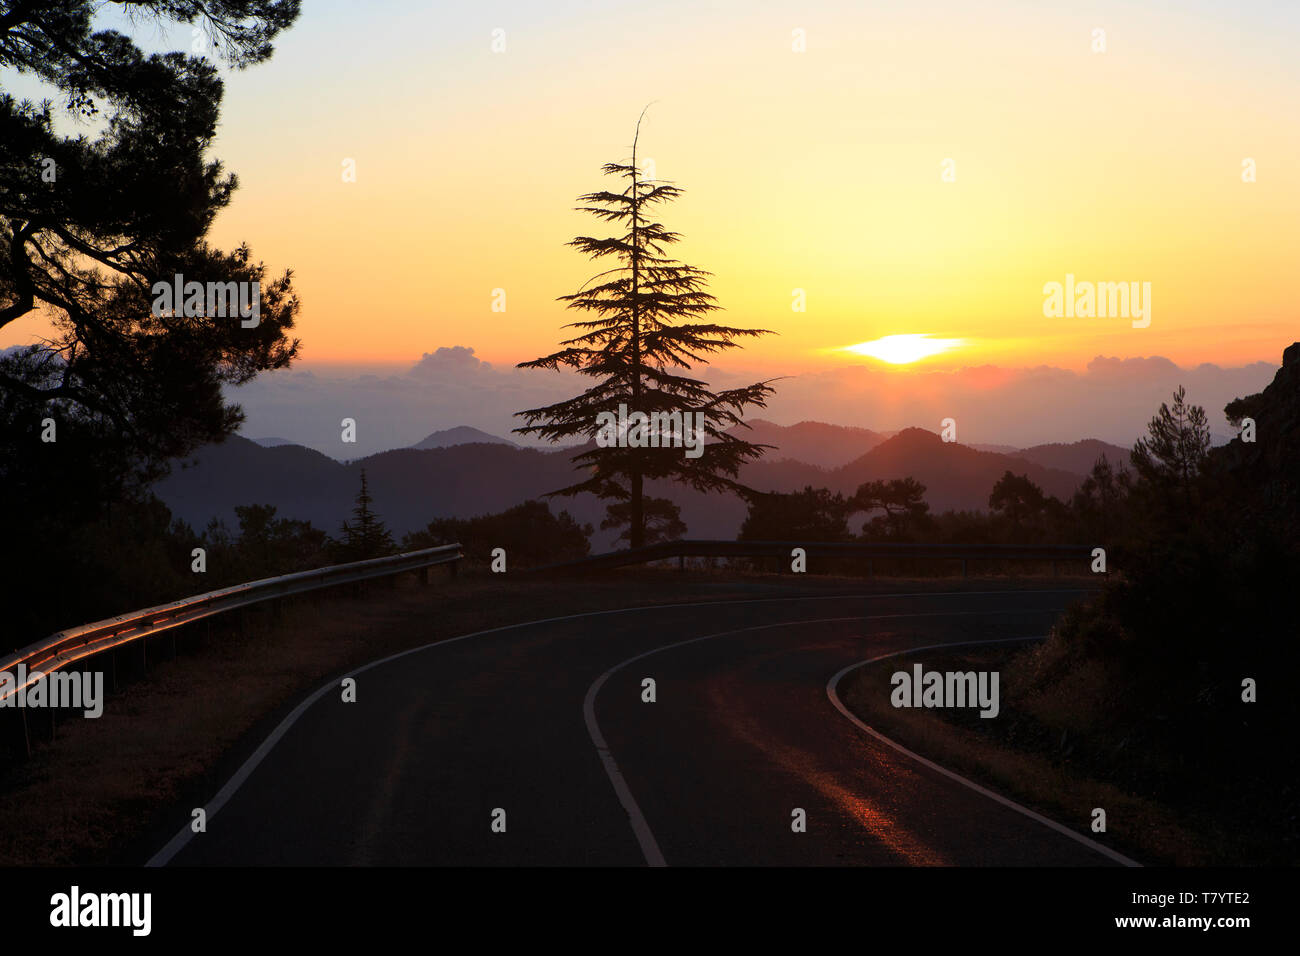 Mount Olympus and the Troodos Mountains in Cyprus at sunrise Stock Photo